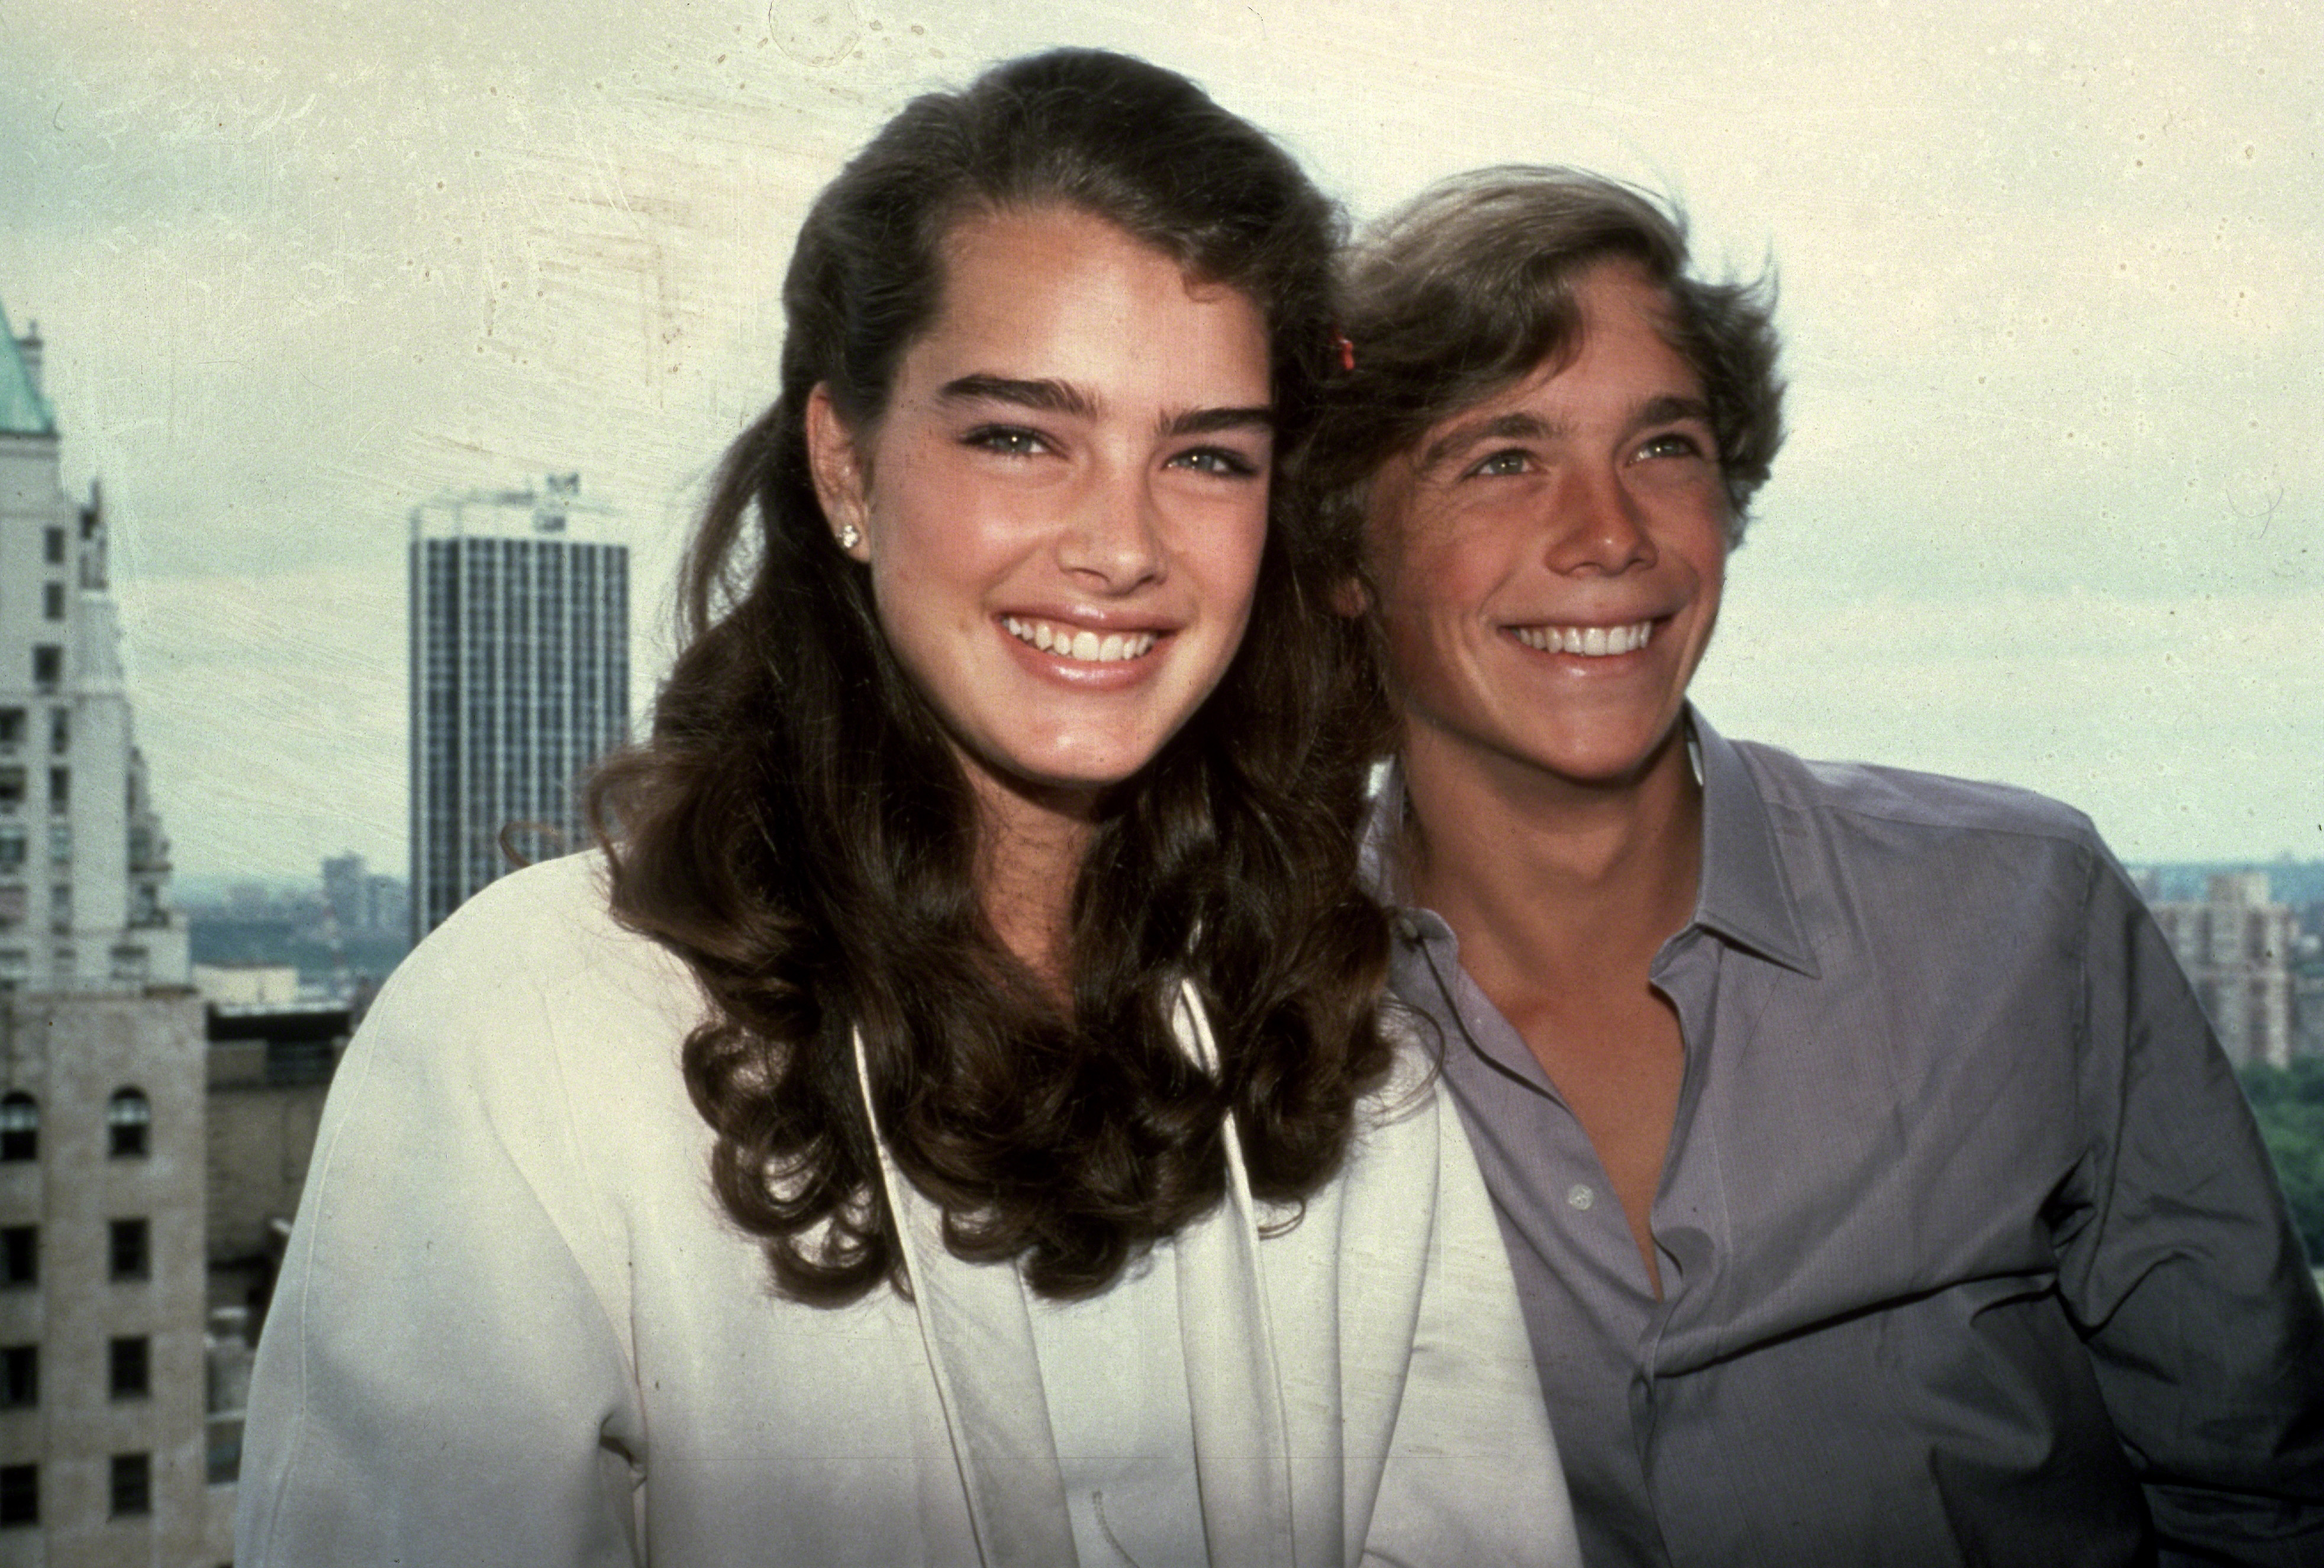 Brooke Shields and Christopher Atkins in New York City in 1980. | Source: Getty Images